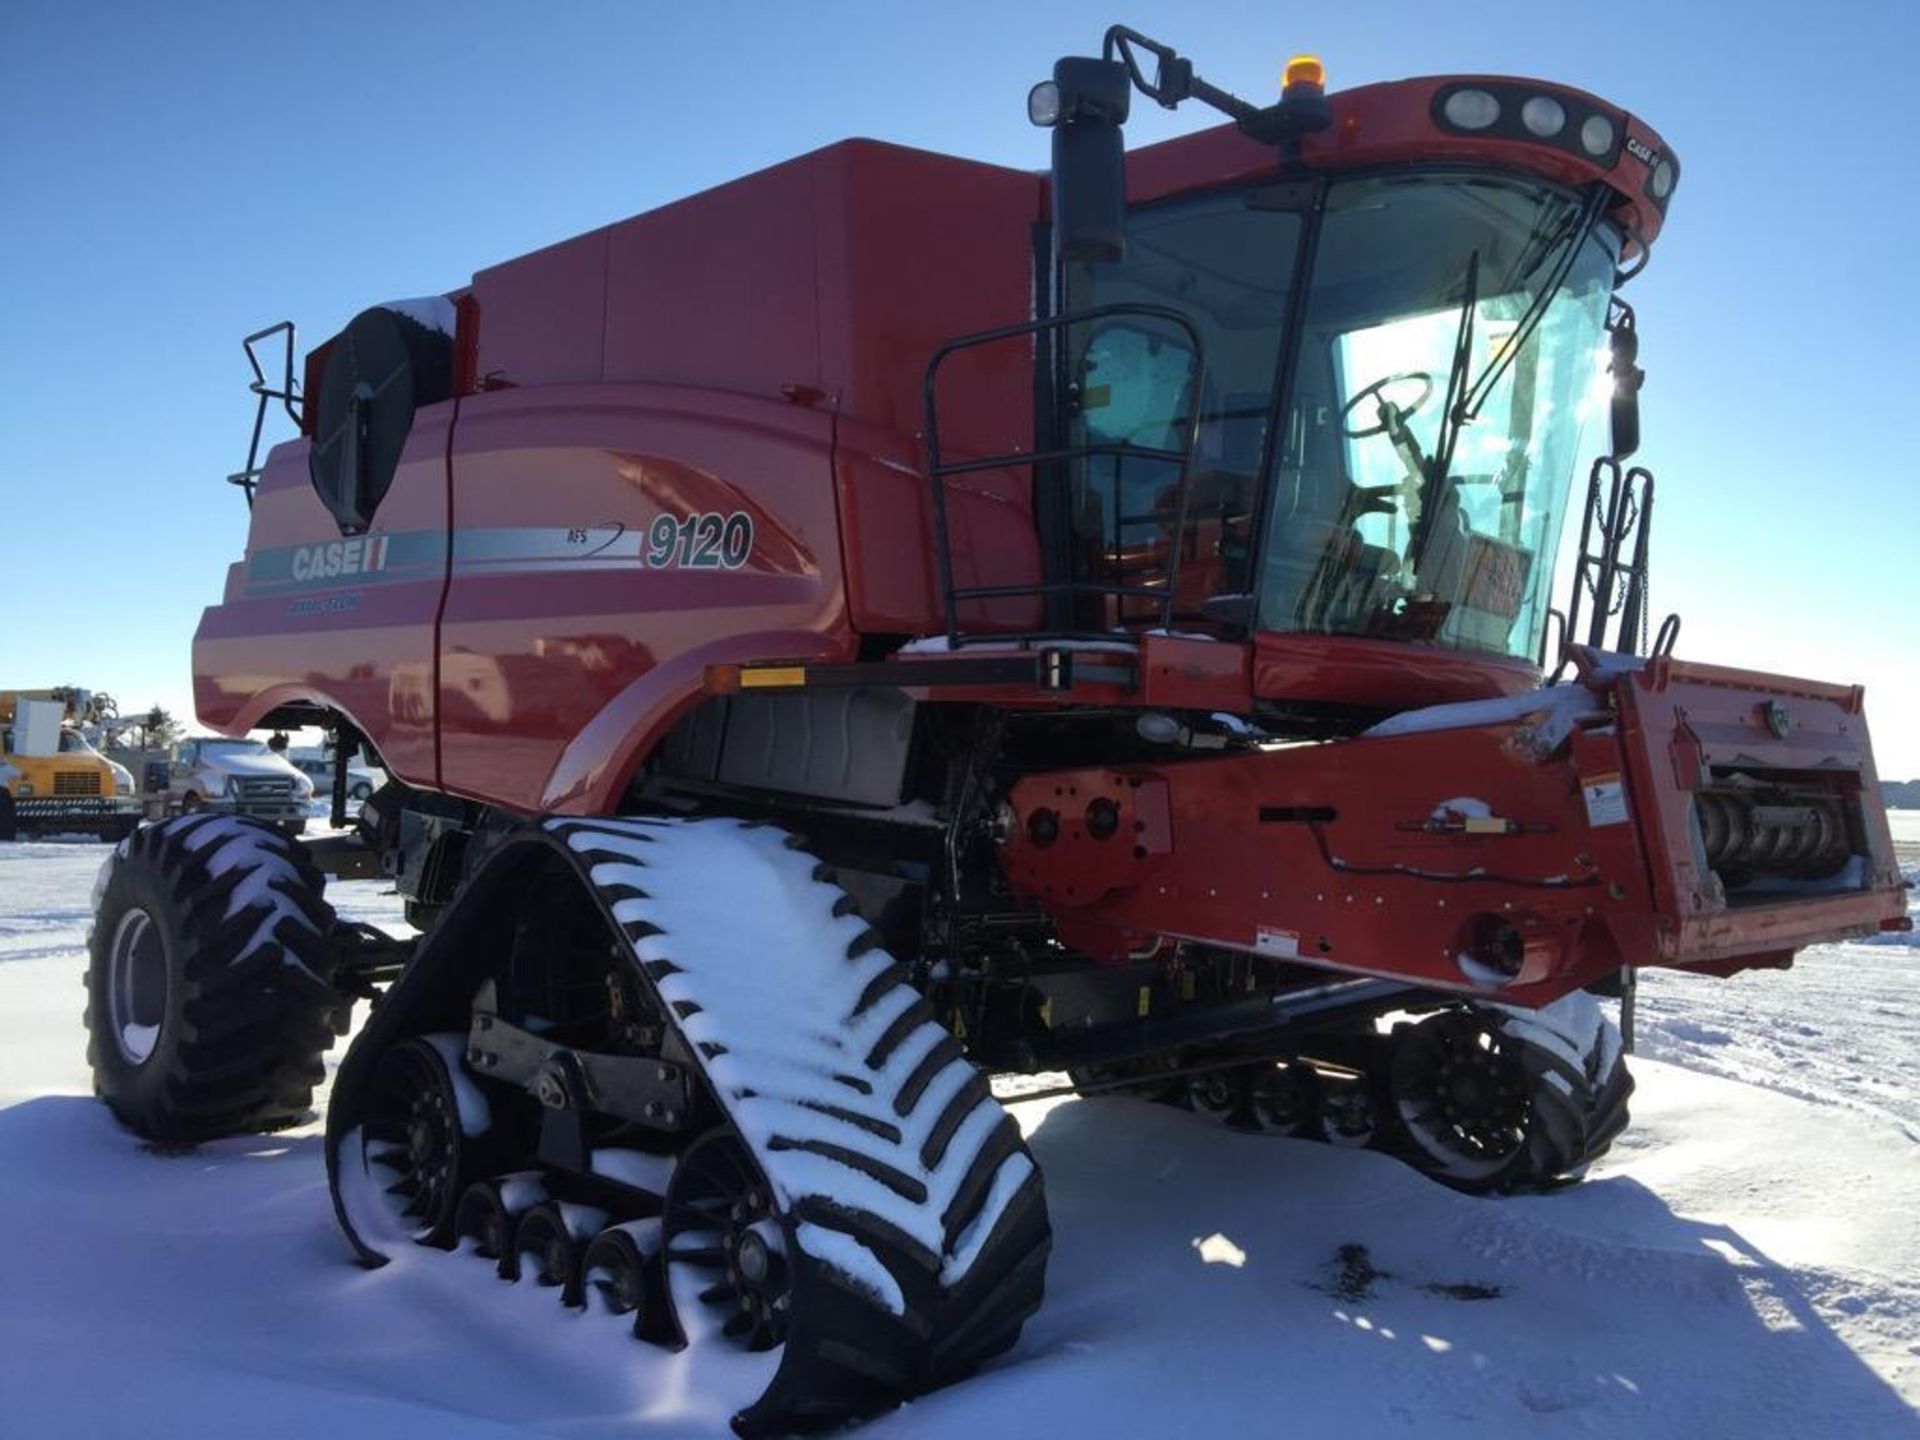 Lot 16 - 2009 Case IH 9120 Combine, auto steer, gps monitor , 36" factory tracks , 1200 sep hours,